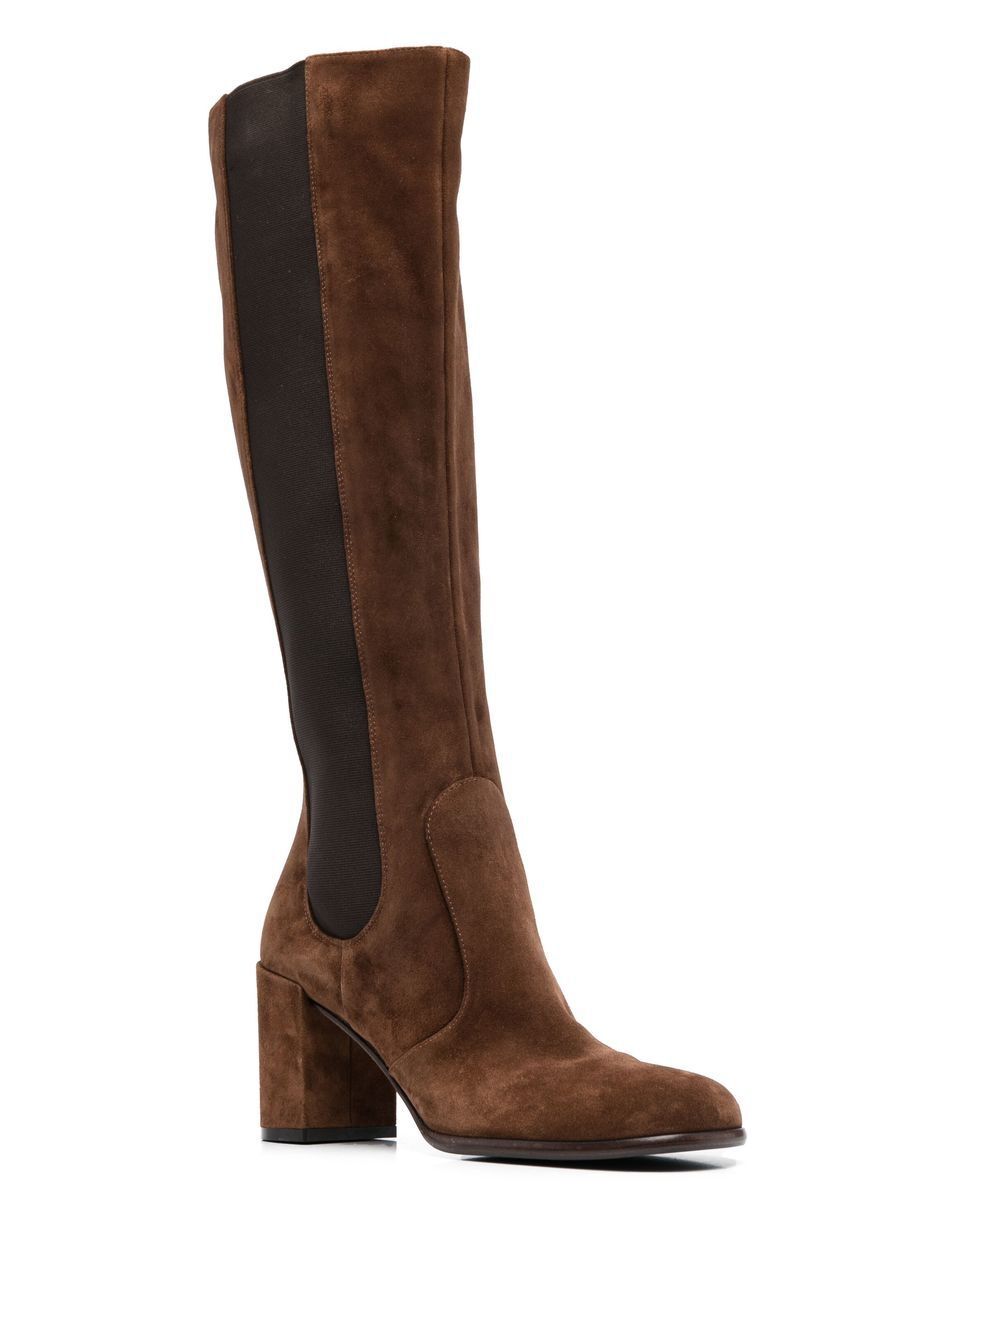 SR Aden Brown Suede Knee-High Boots - SERGIO ROSSI - Liberty Shoes Australia